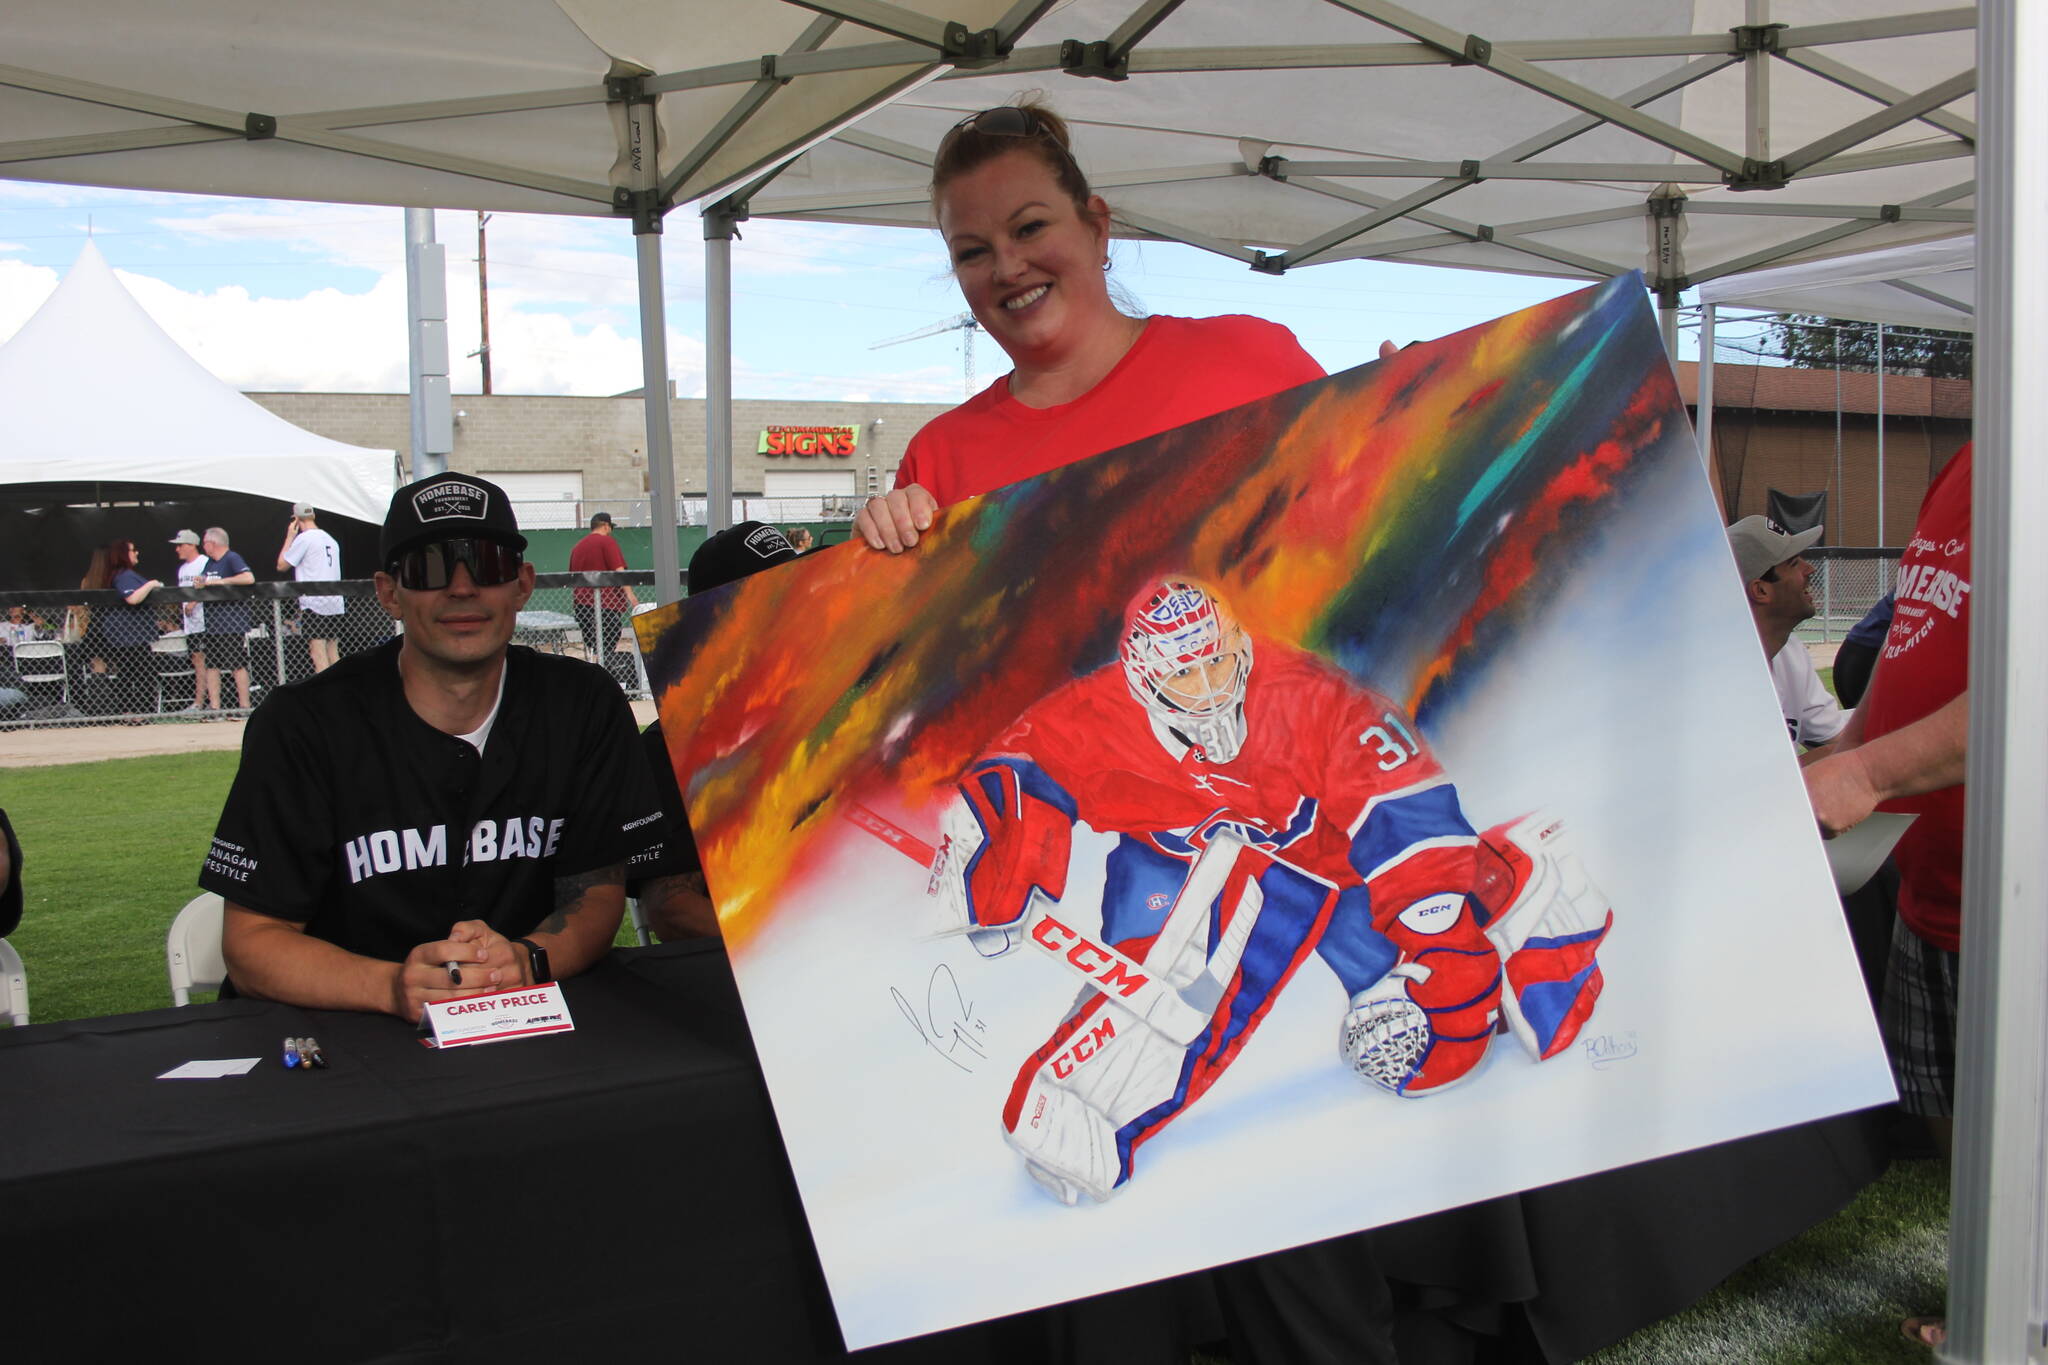 A fan presents her self-drawn Carey Price painting to the goaltender at Homebase 2022 in Kelowna. (Jake Courtepatte/Capital News)